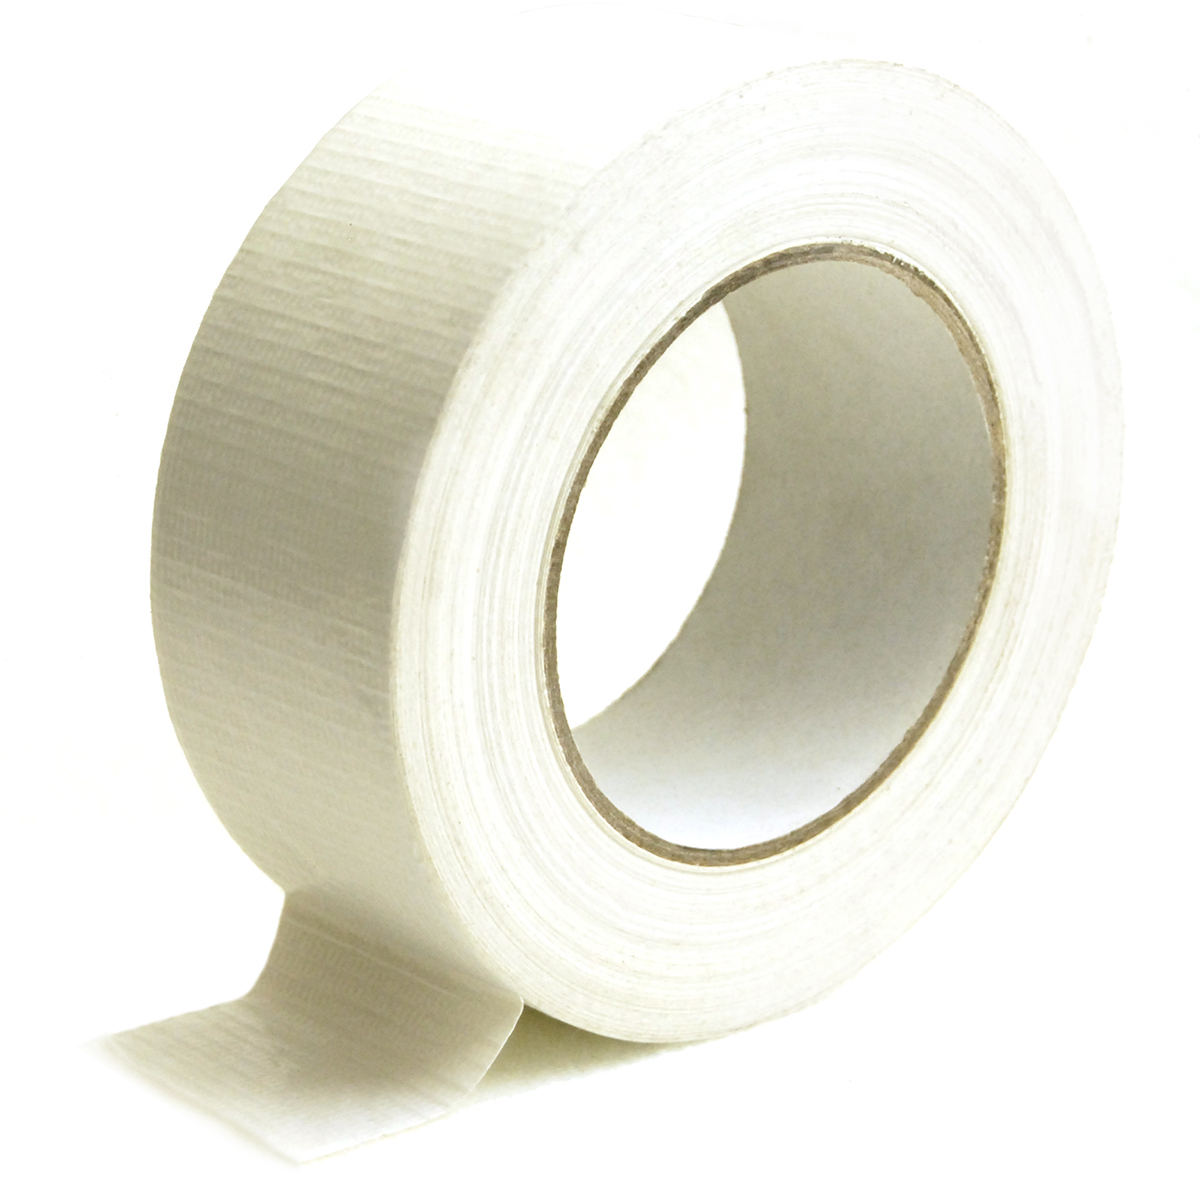 Panzertape 48,5 mm x 50 m Duct Tape weiß - verpacking